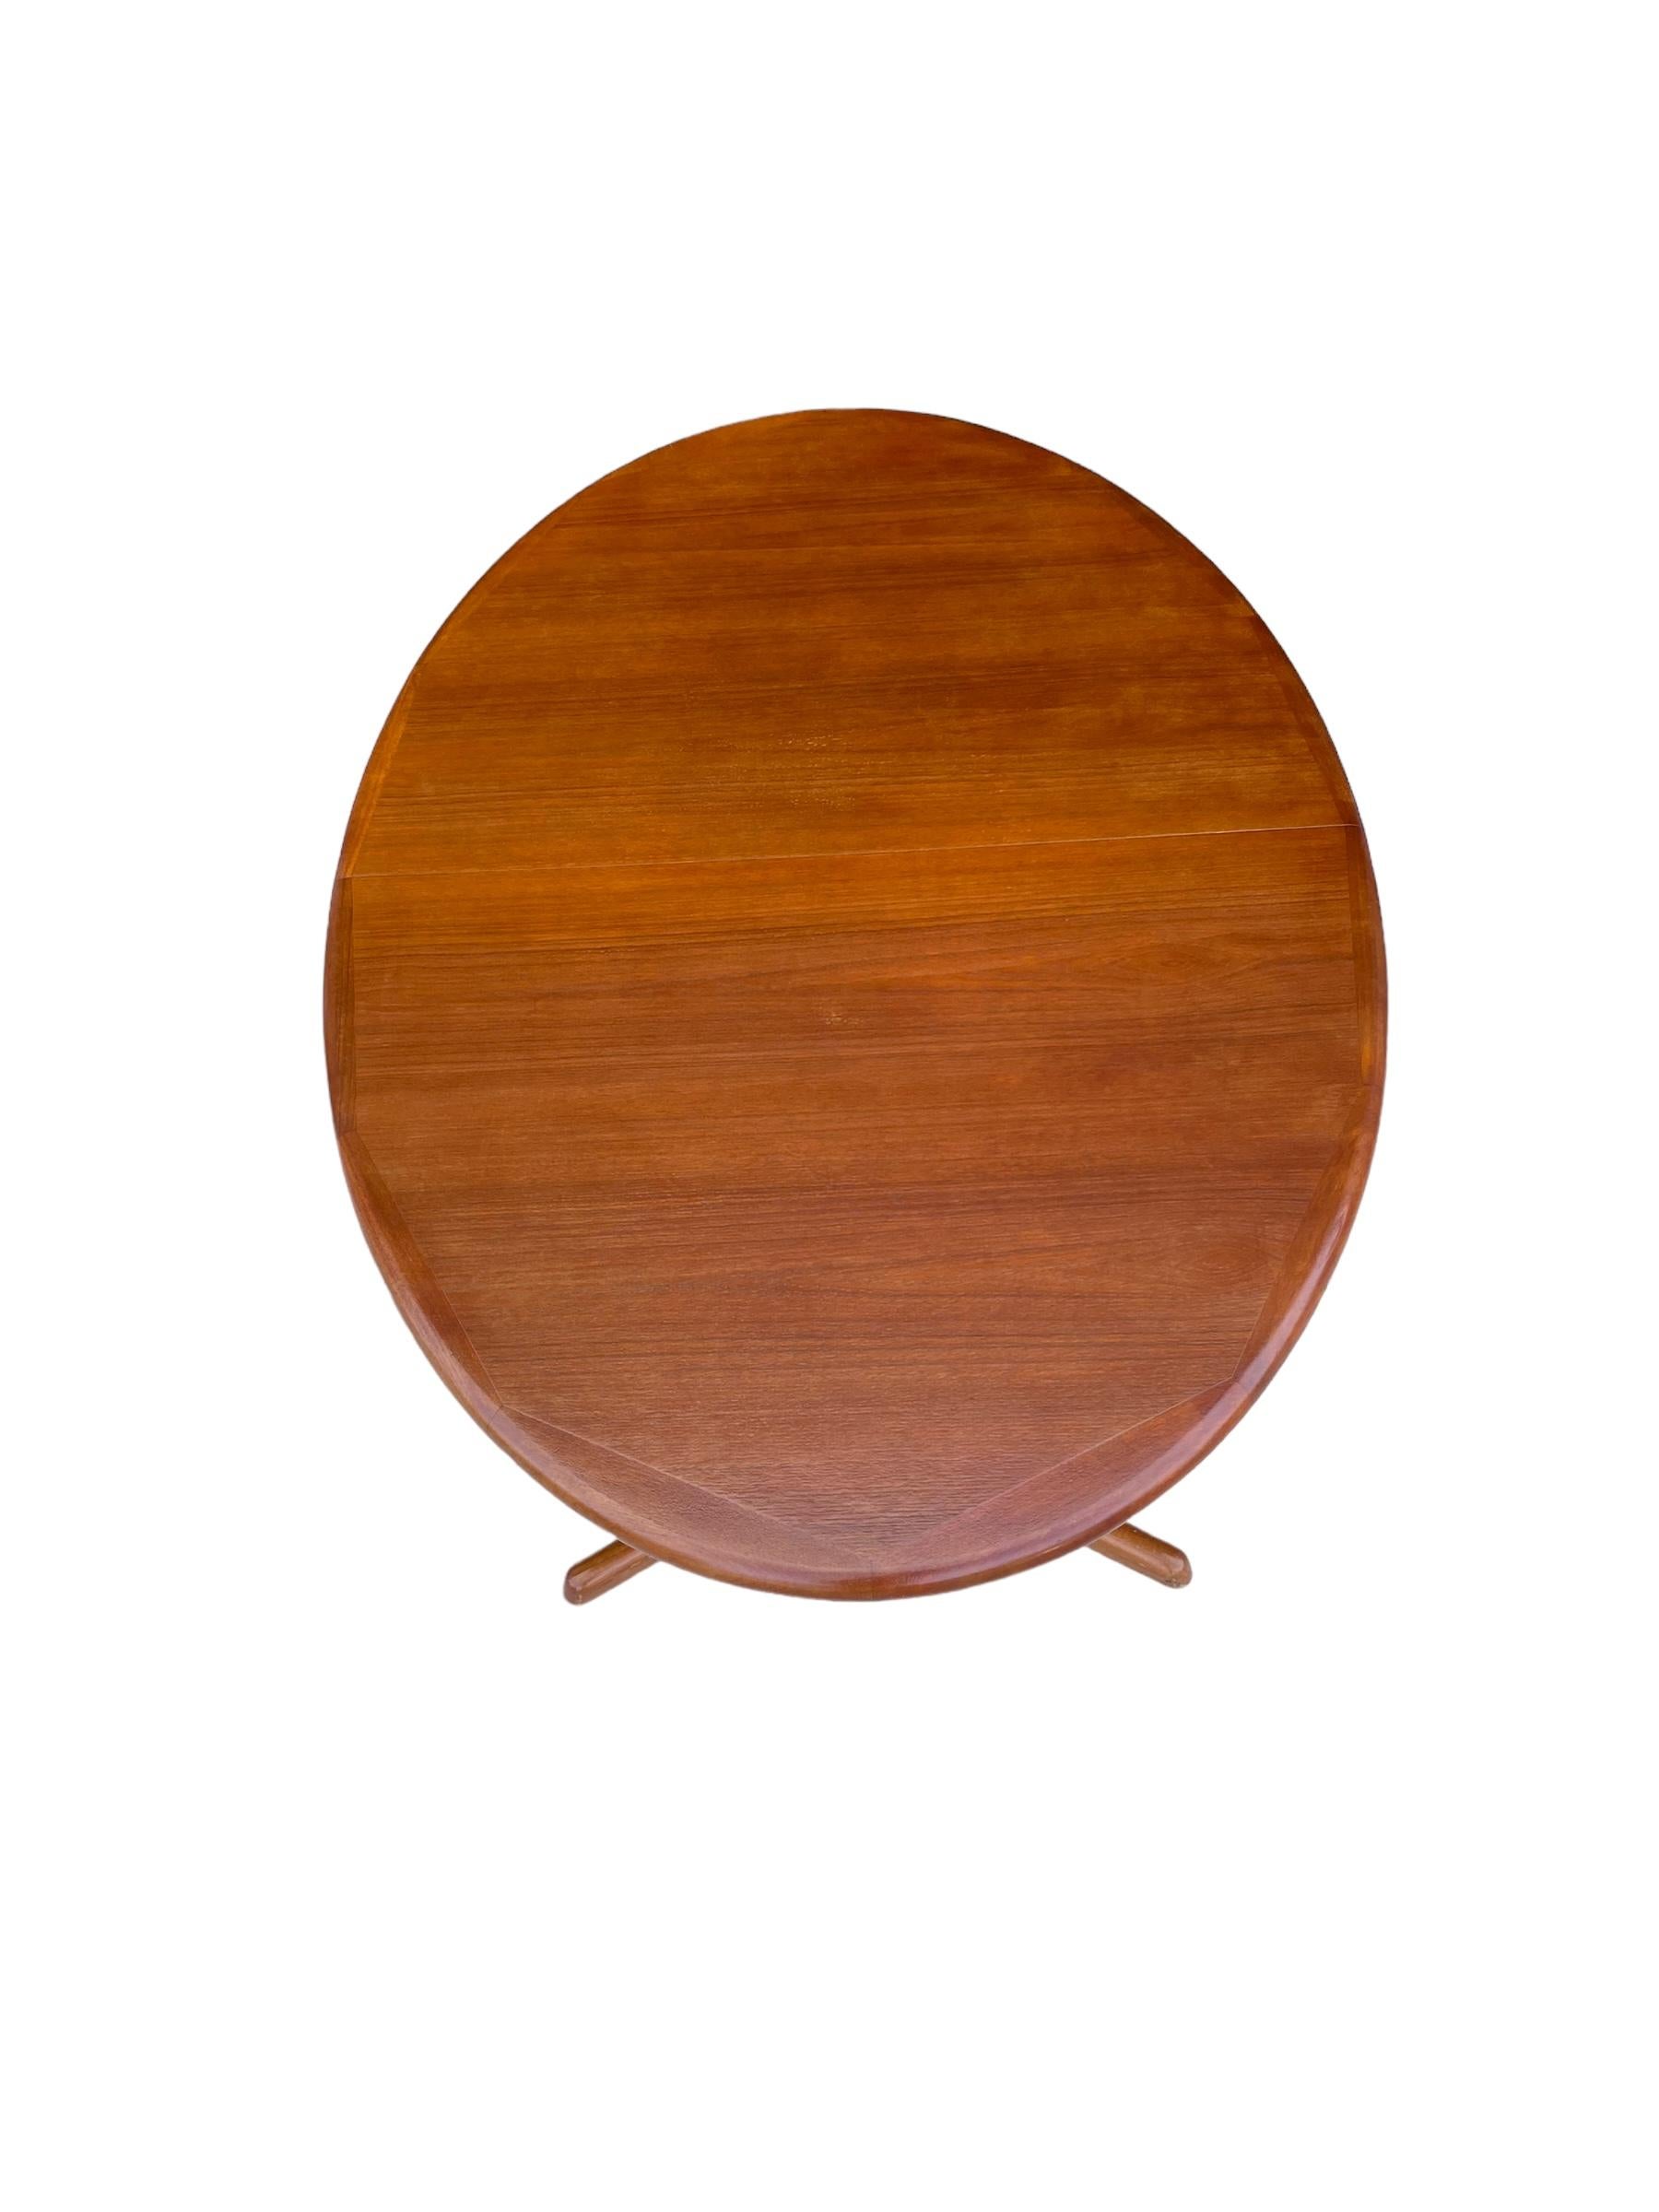 Danish Oval Dining Table in Teak by Dyrlund In Good Condition For Sale In Brooklyn, NY